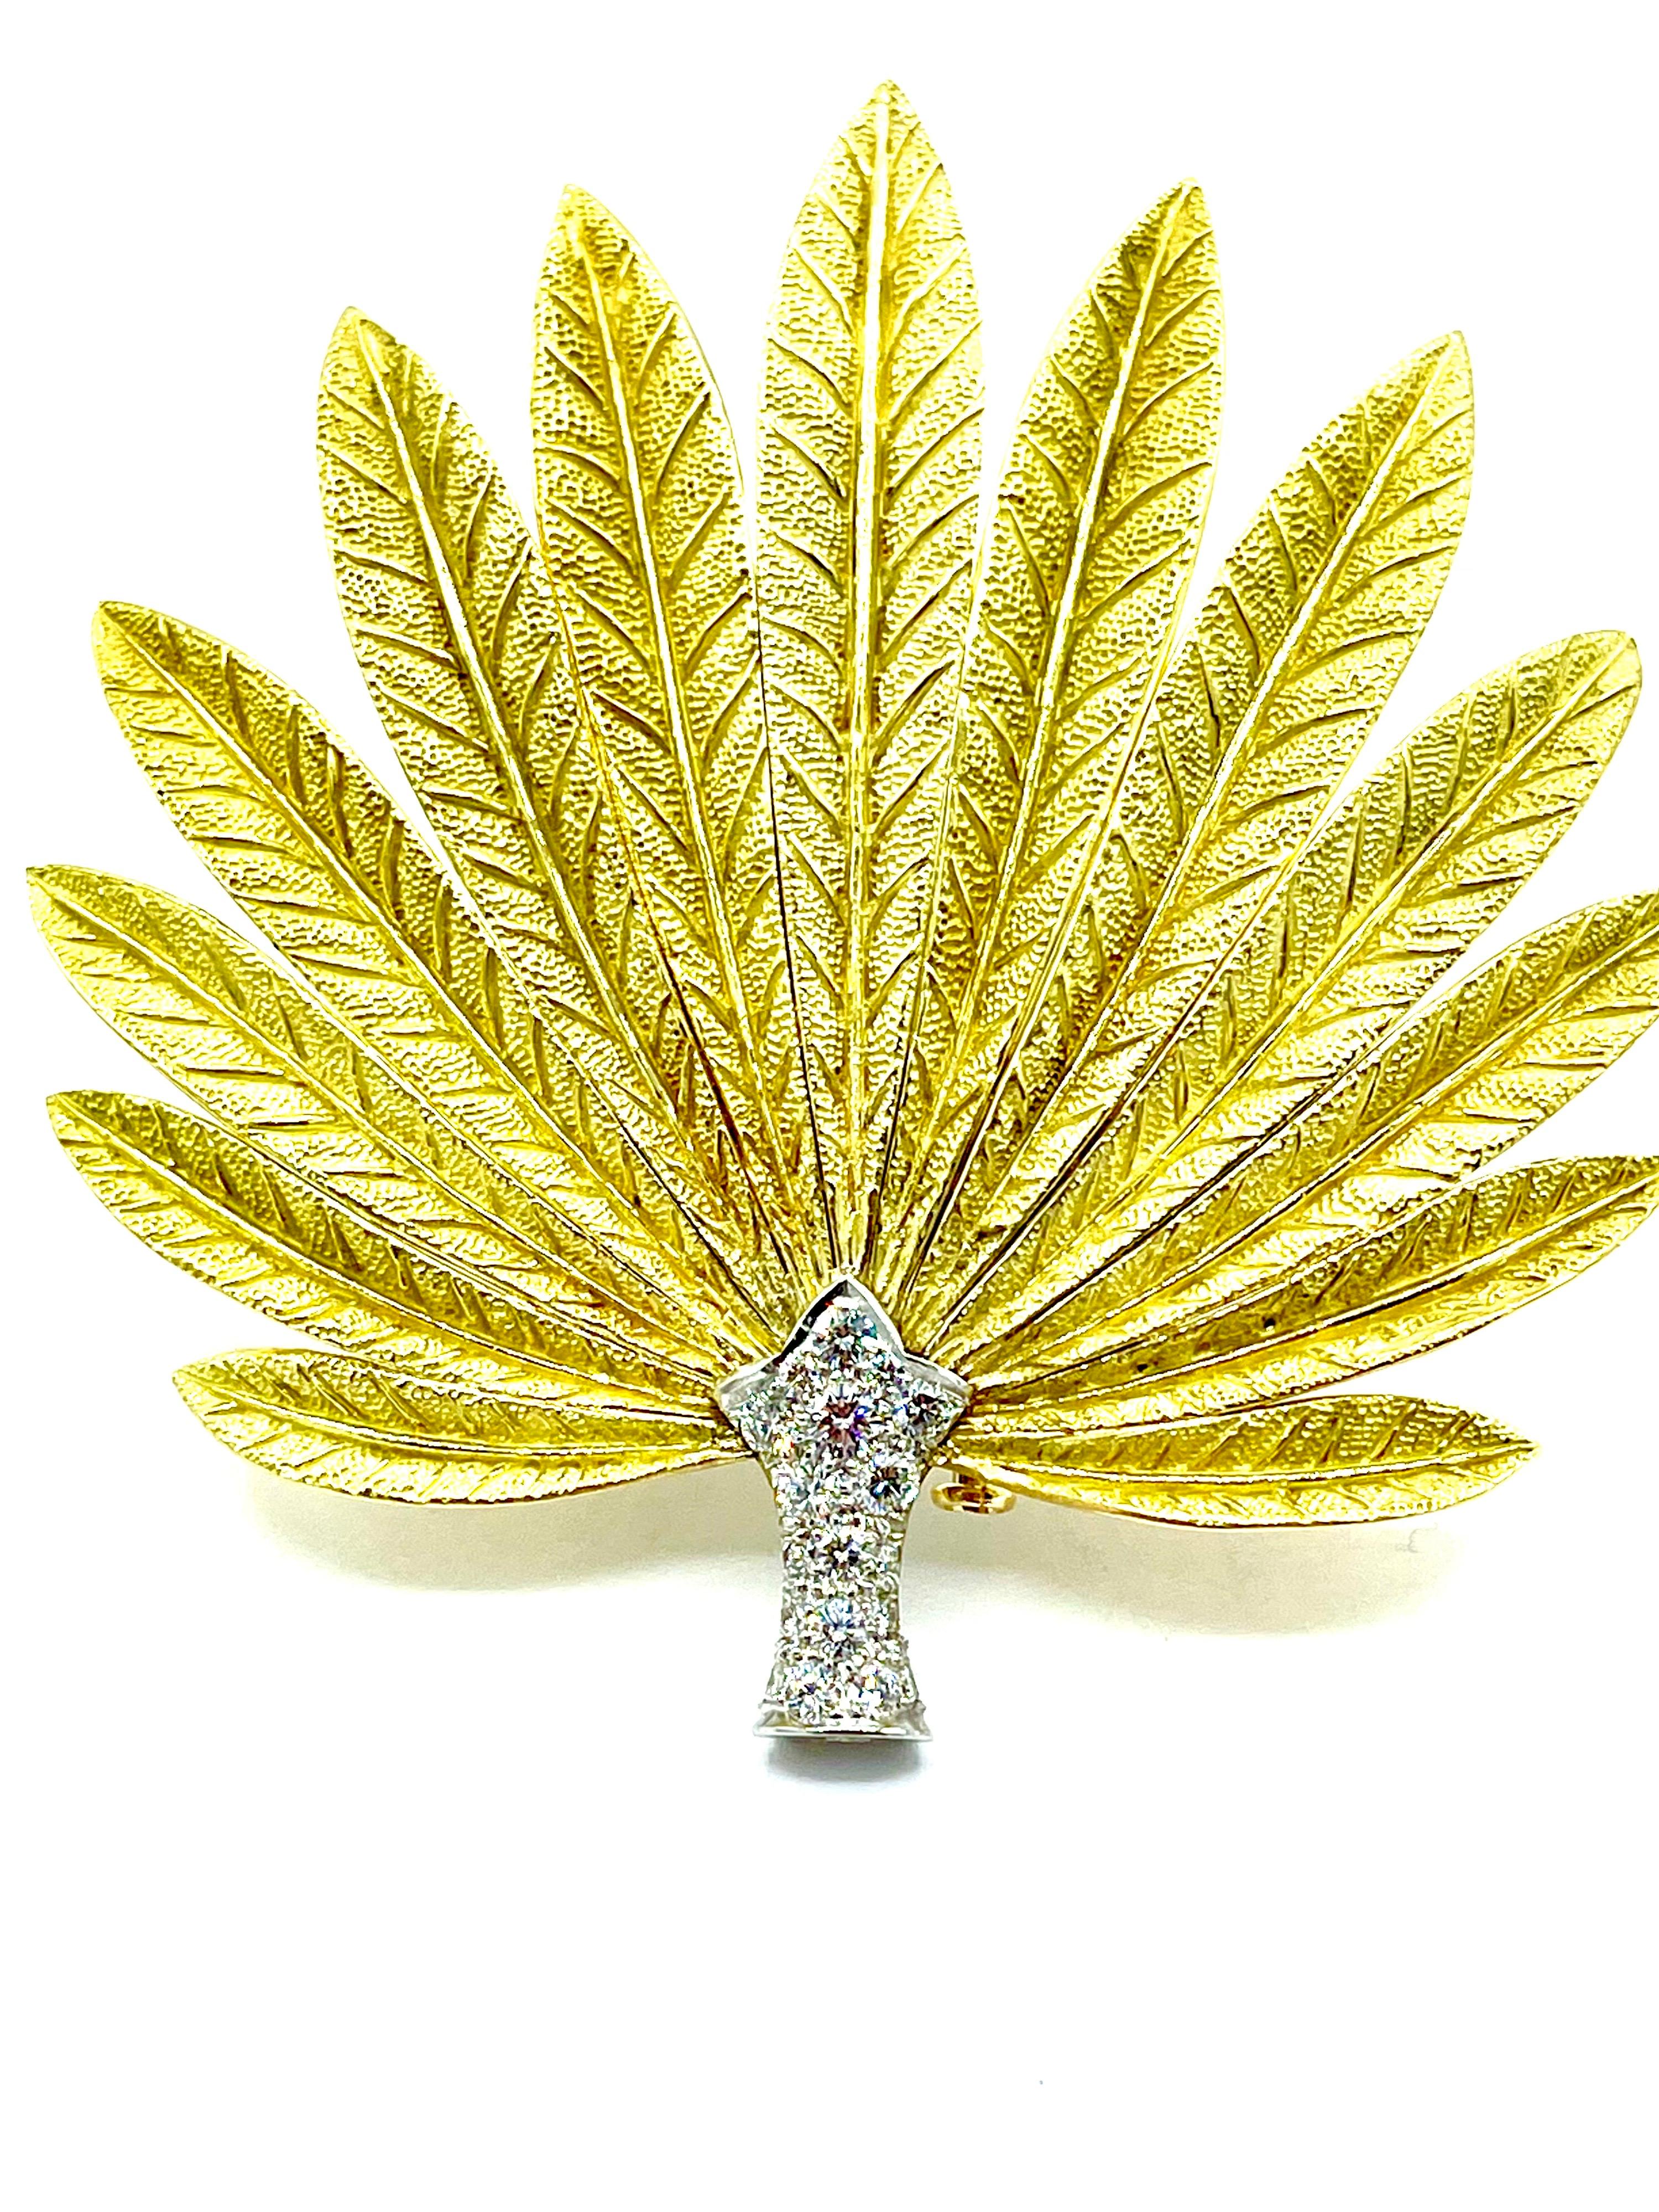 A gorgeous Late 20th Century Diamond feathered fan brooch!  The platinum base is set with 18 round brilliant Diamonds totaling 0.90 carats.  From the base are feathers created in 18K beautifully textured yellow gold, graduating in length as it comes